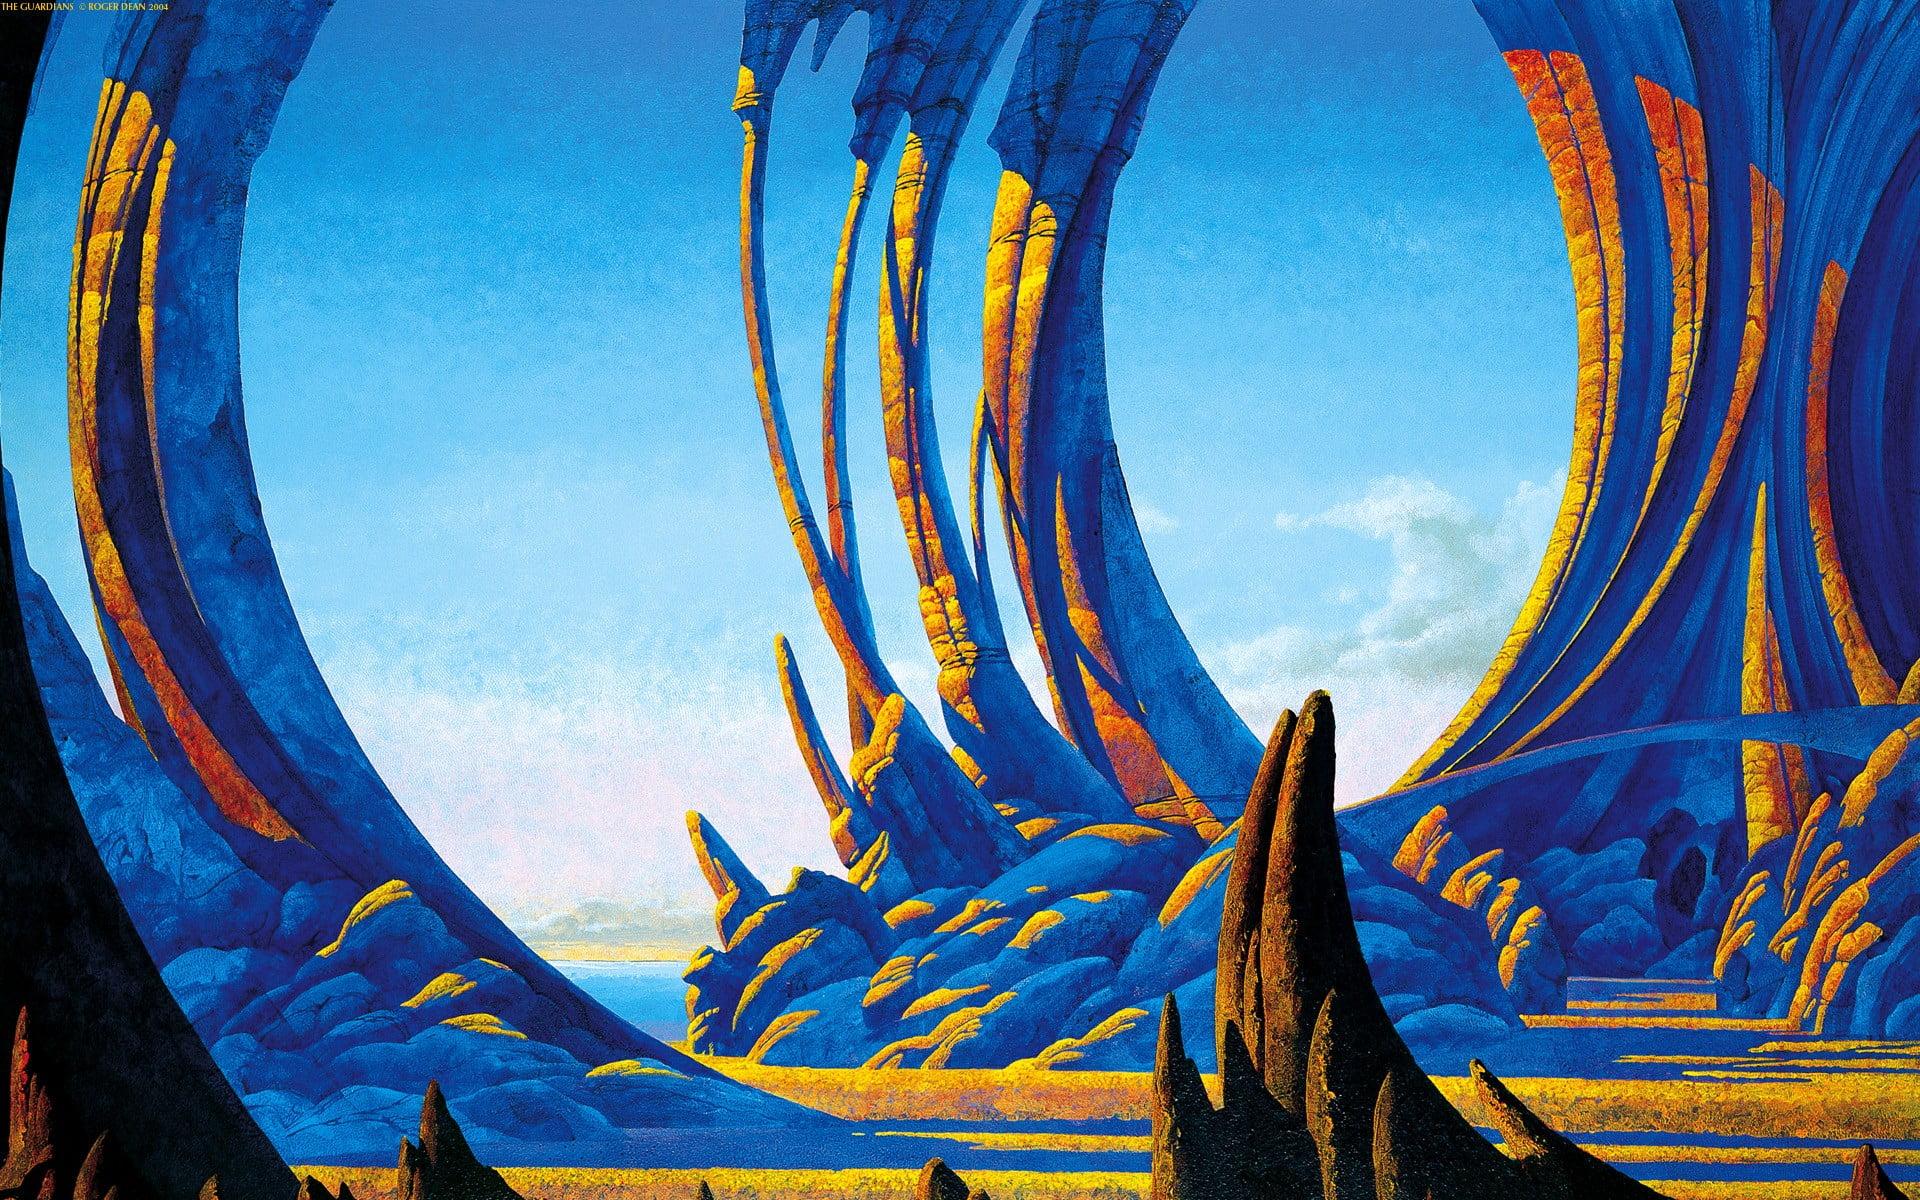 Blue and yellow bird painting, Roger Dean, Yes, progressive